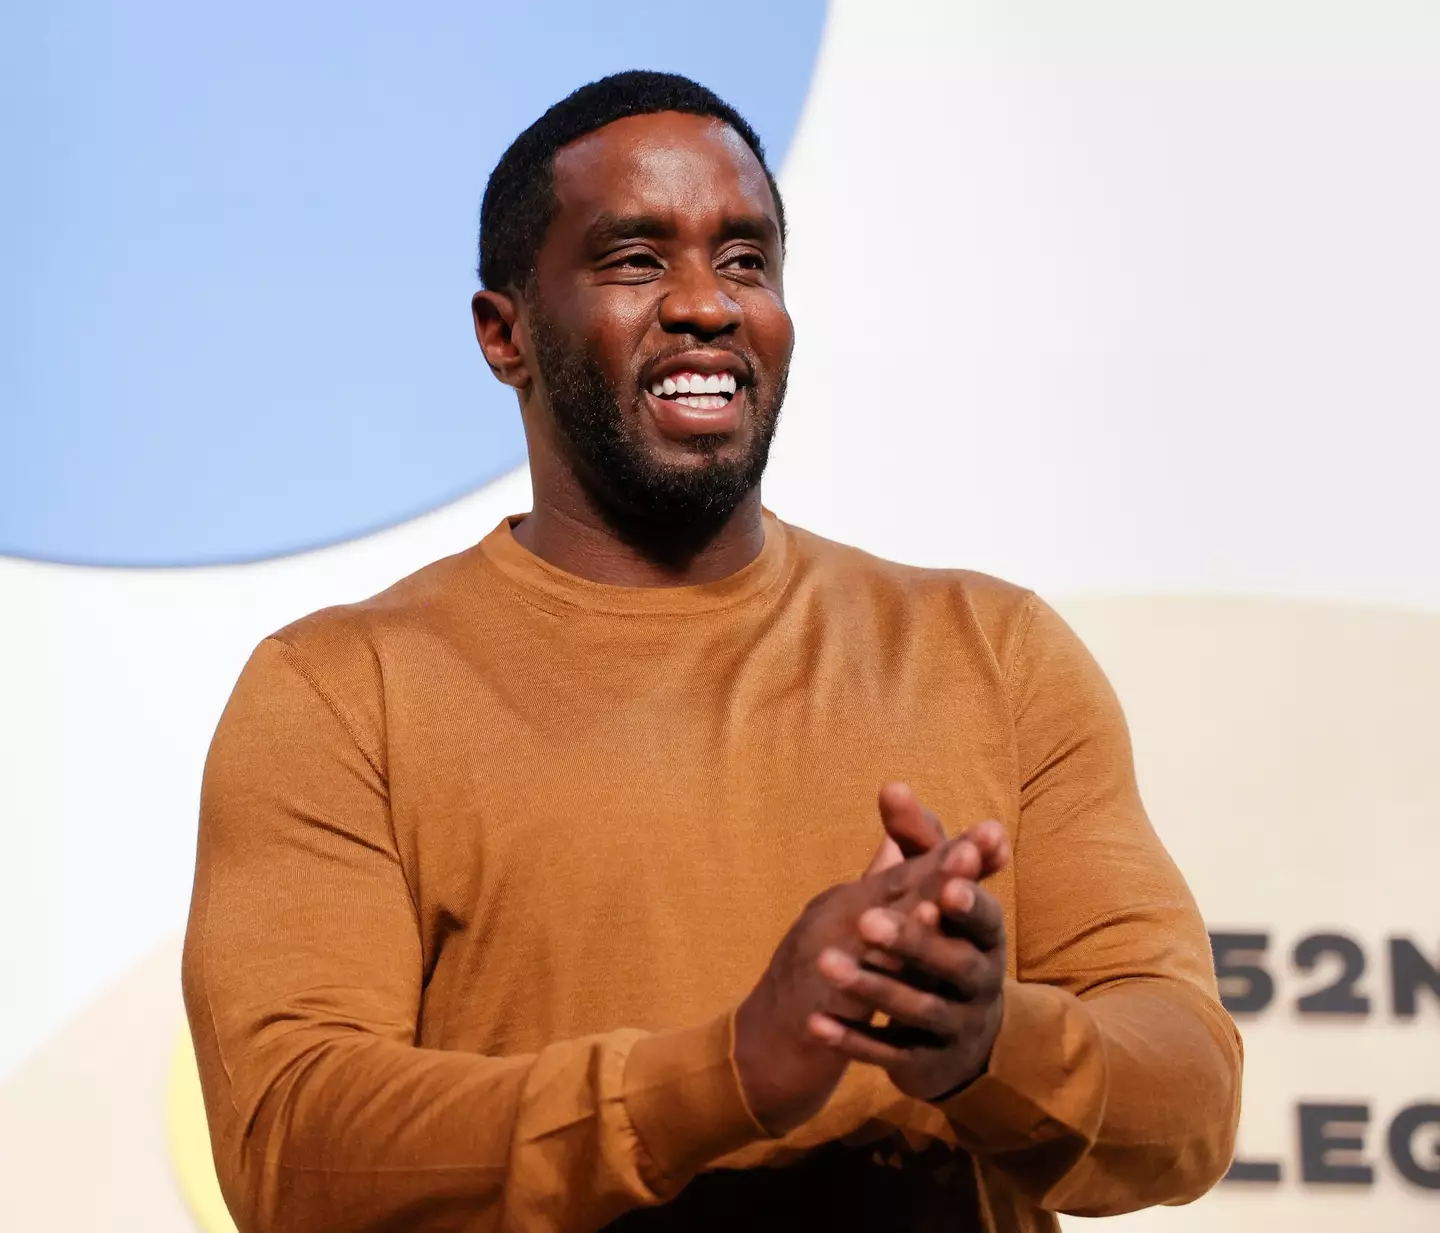 Diddy has previously denied the allegations.